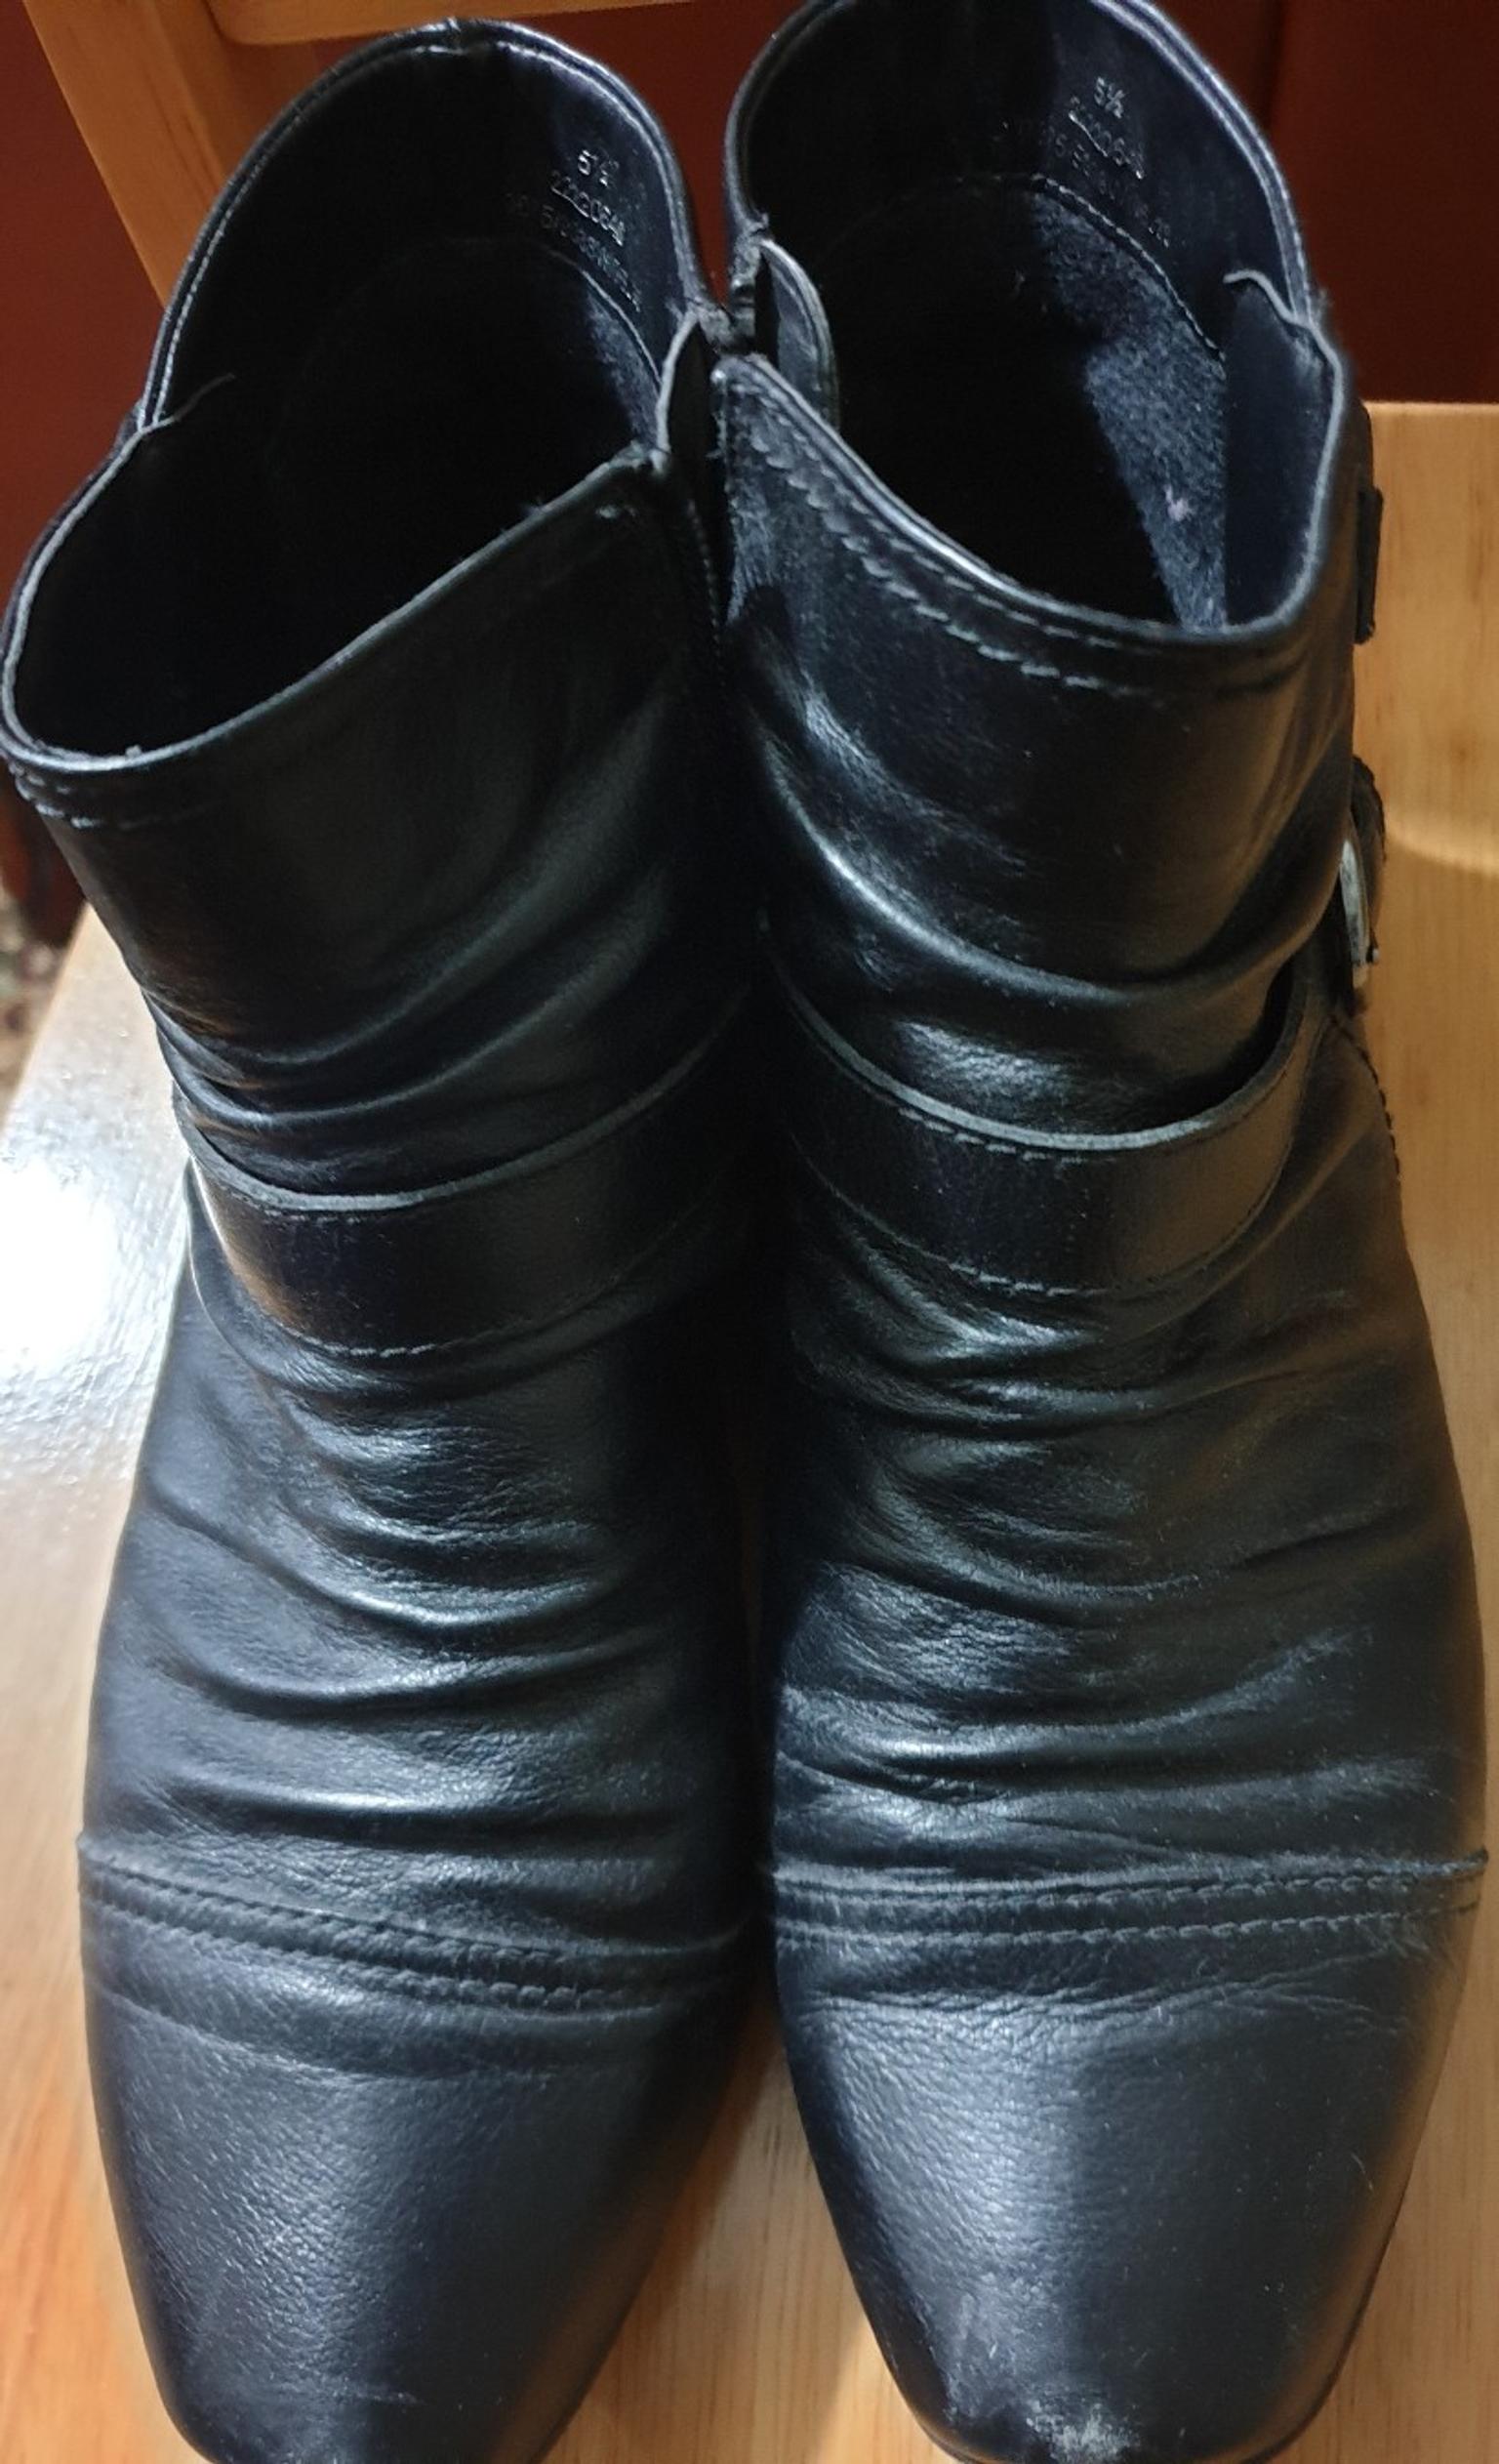 marks and spencers black boots